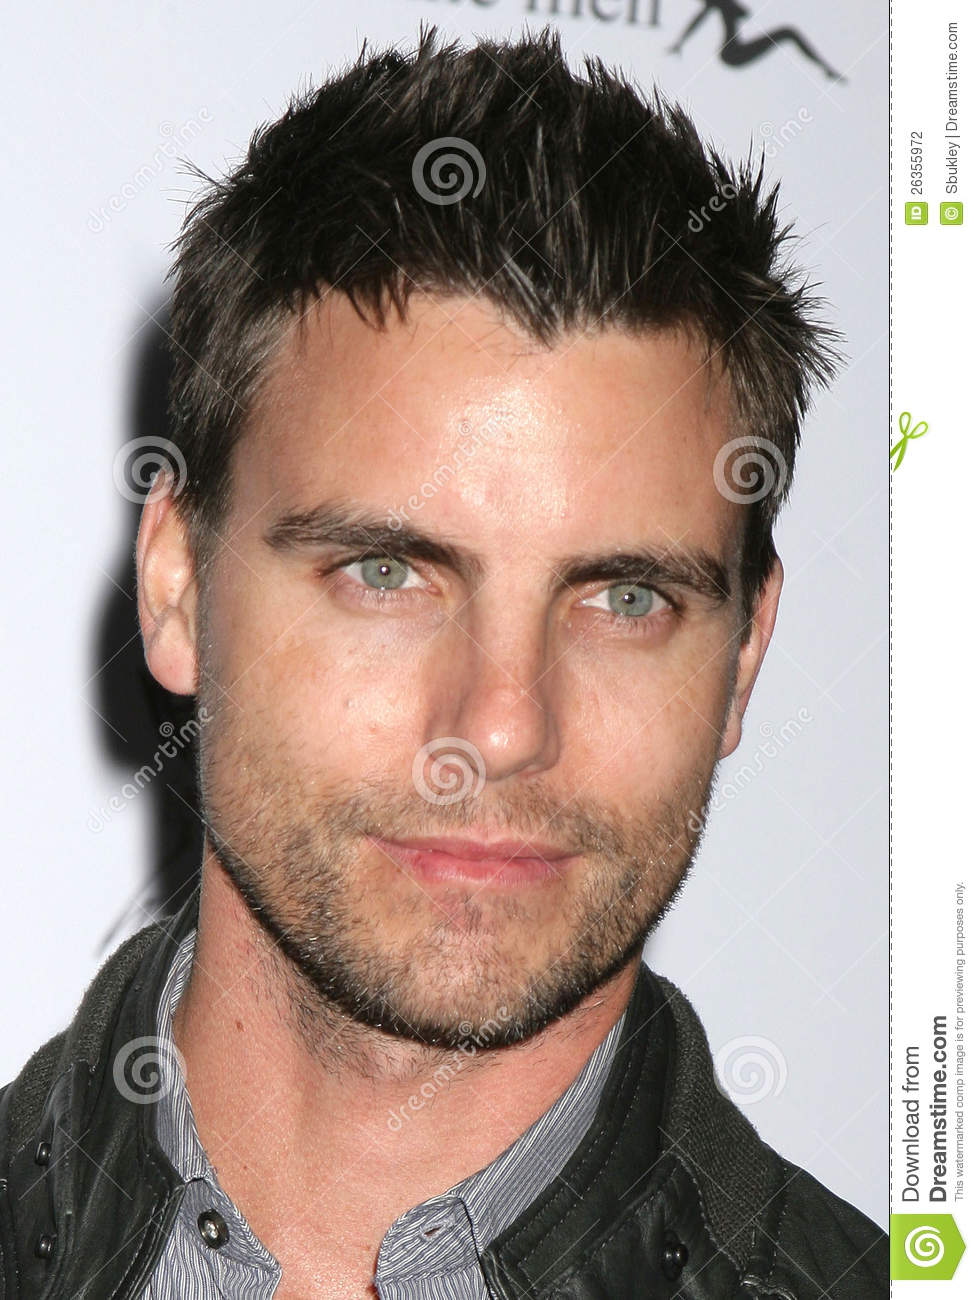 colin-egglesfield-movies